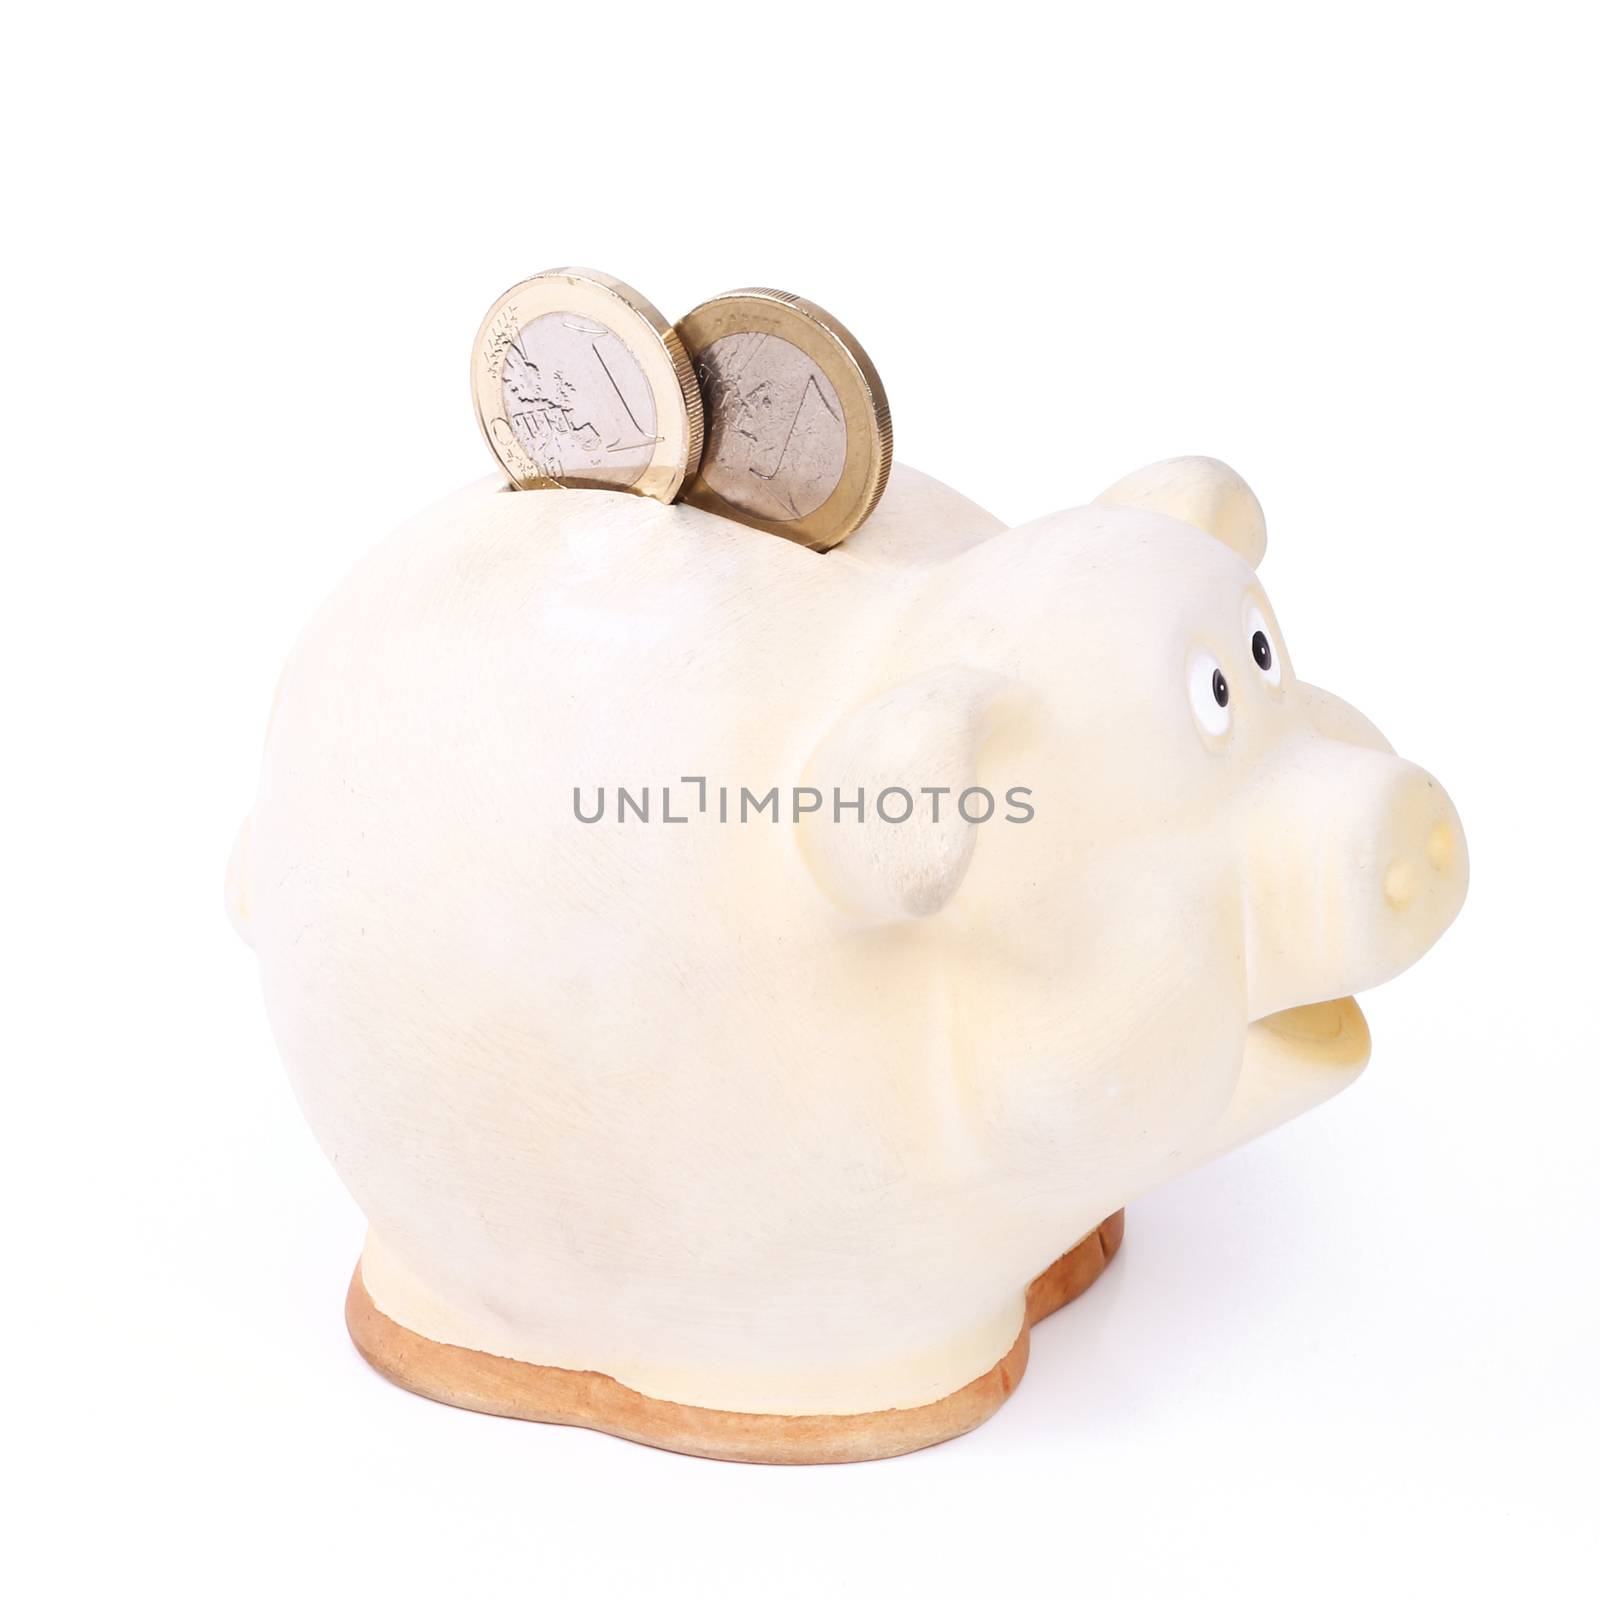 Piggy. Moneybox on the table